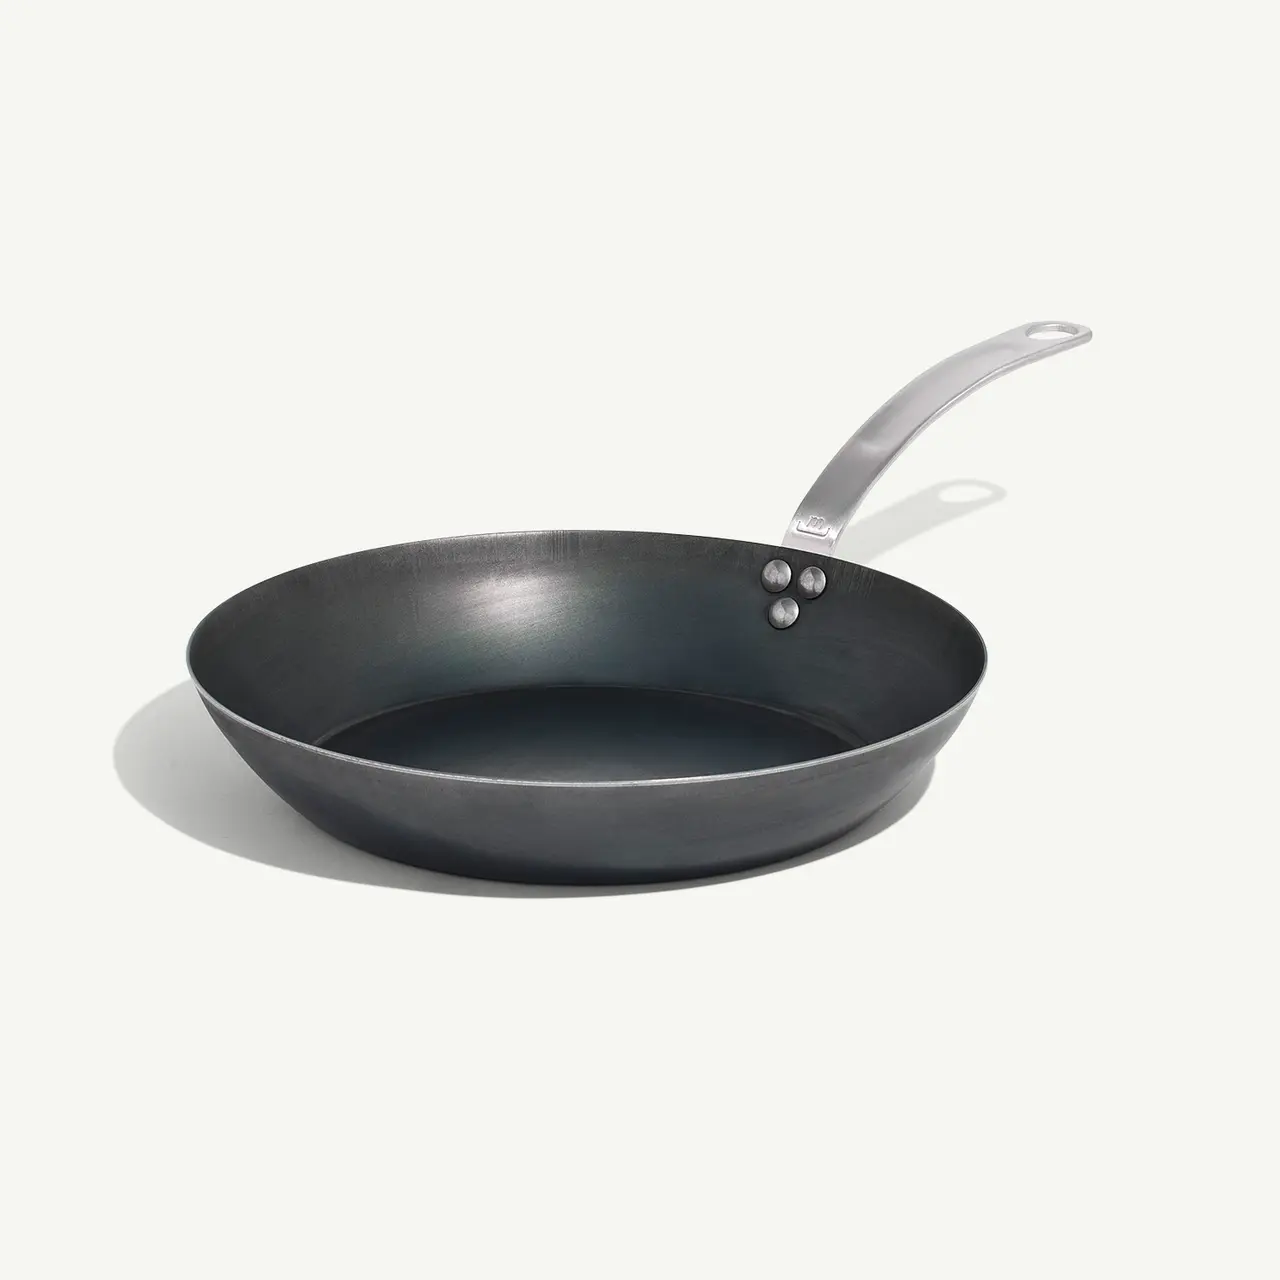 A non-stick frying pan with a stainless steel handle is placed on a light background.